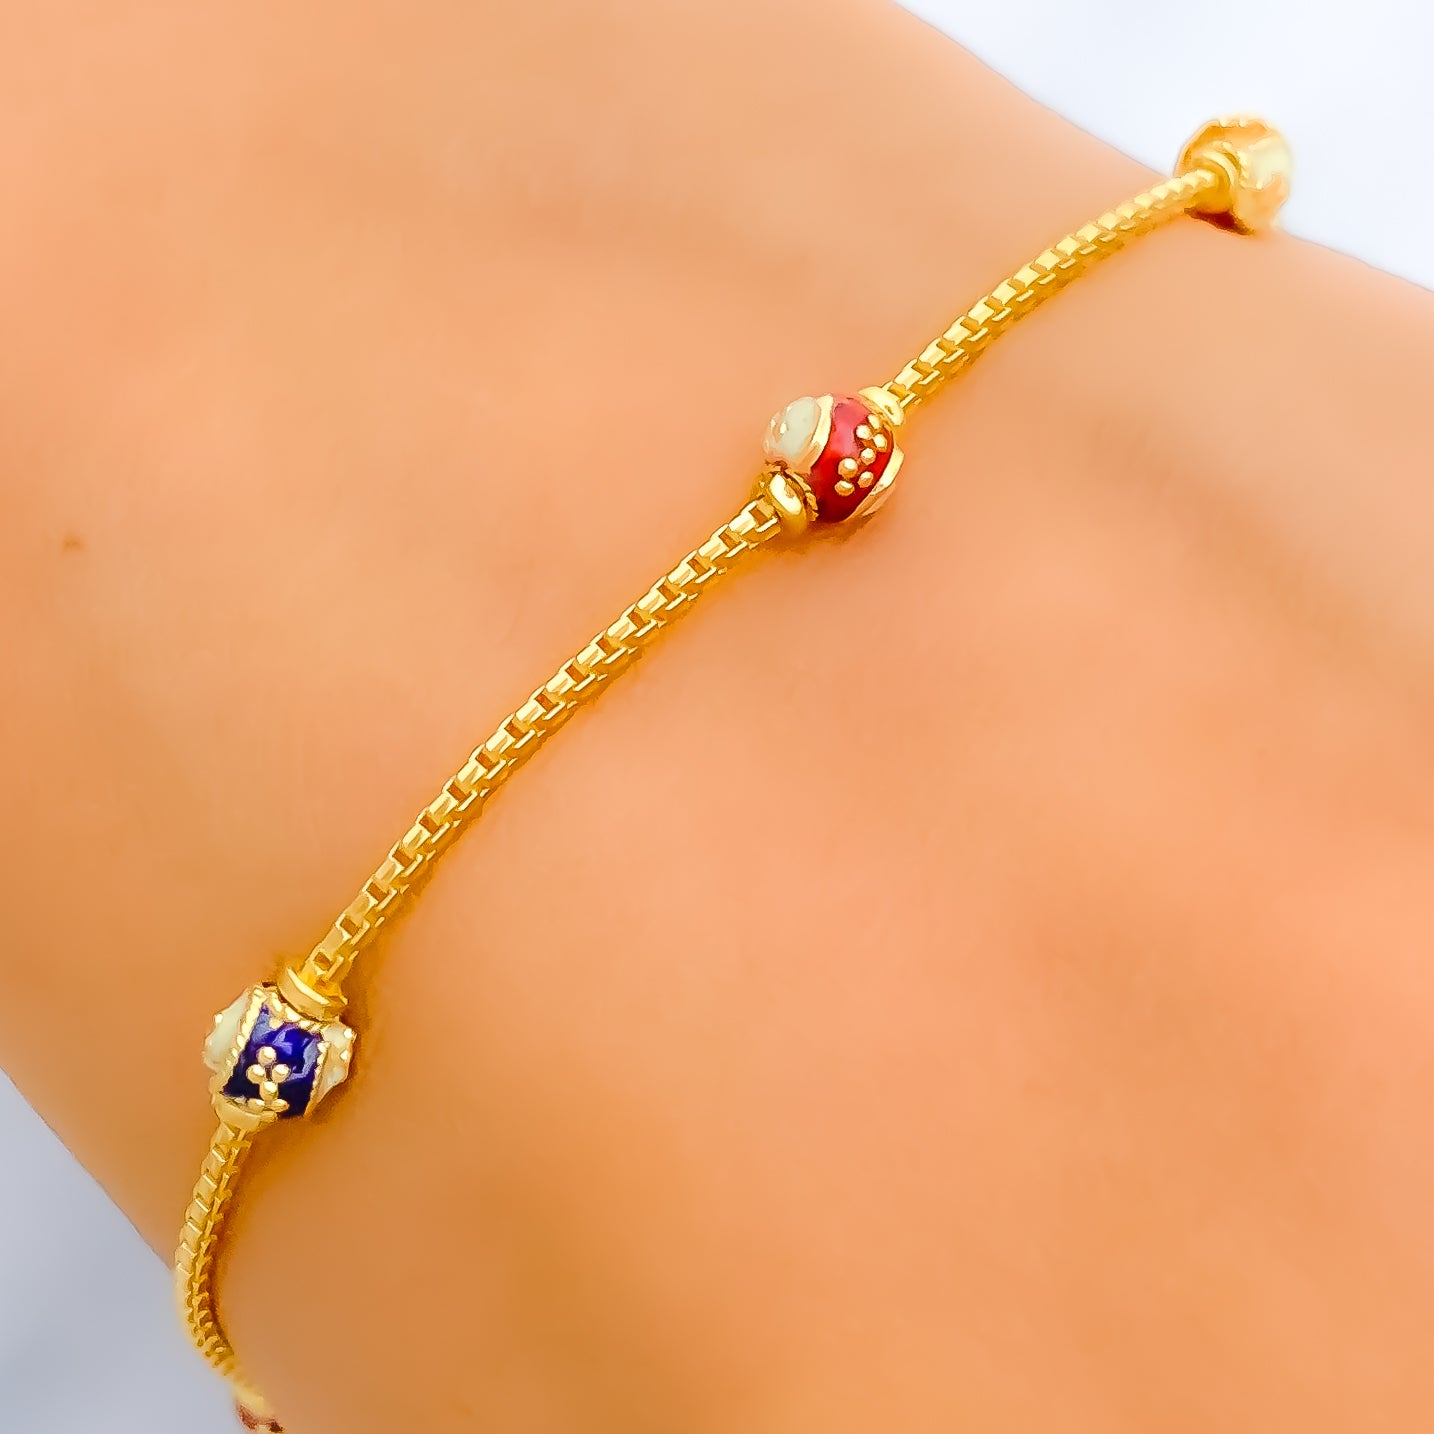 Fashion Jewelry Attractive Daily Wear Square kundan Zircon Mangalsutra With  Hanging Golden Ball Bracelet For Girls CB32 – Buy Indian Fashion Jewellery